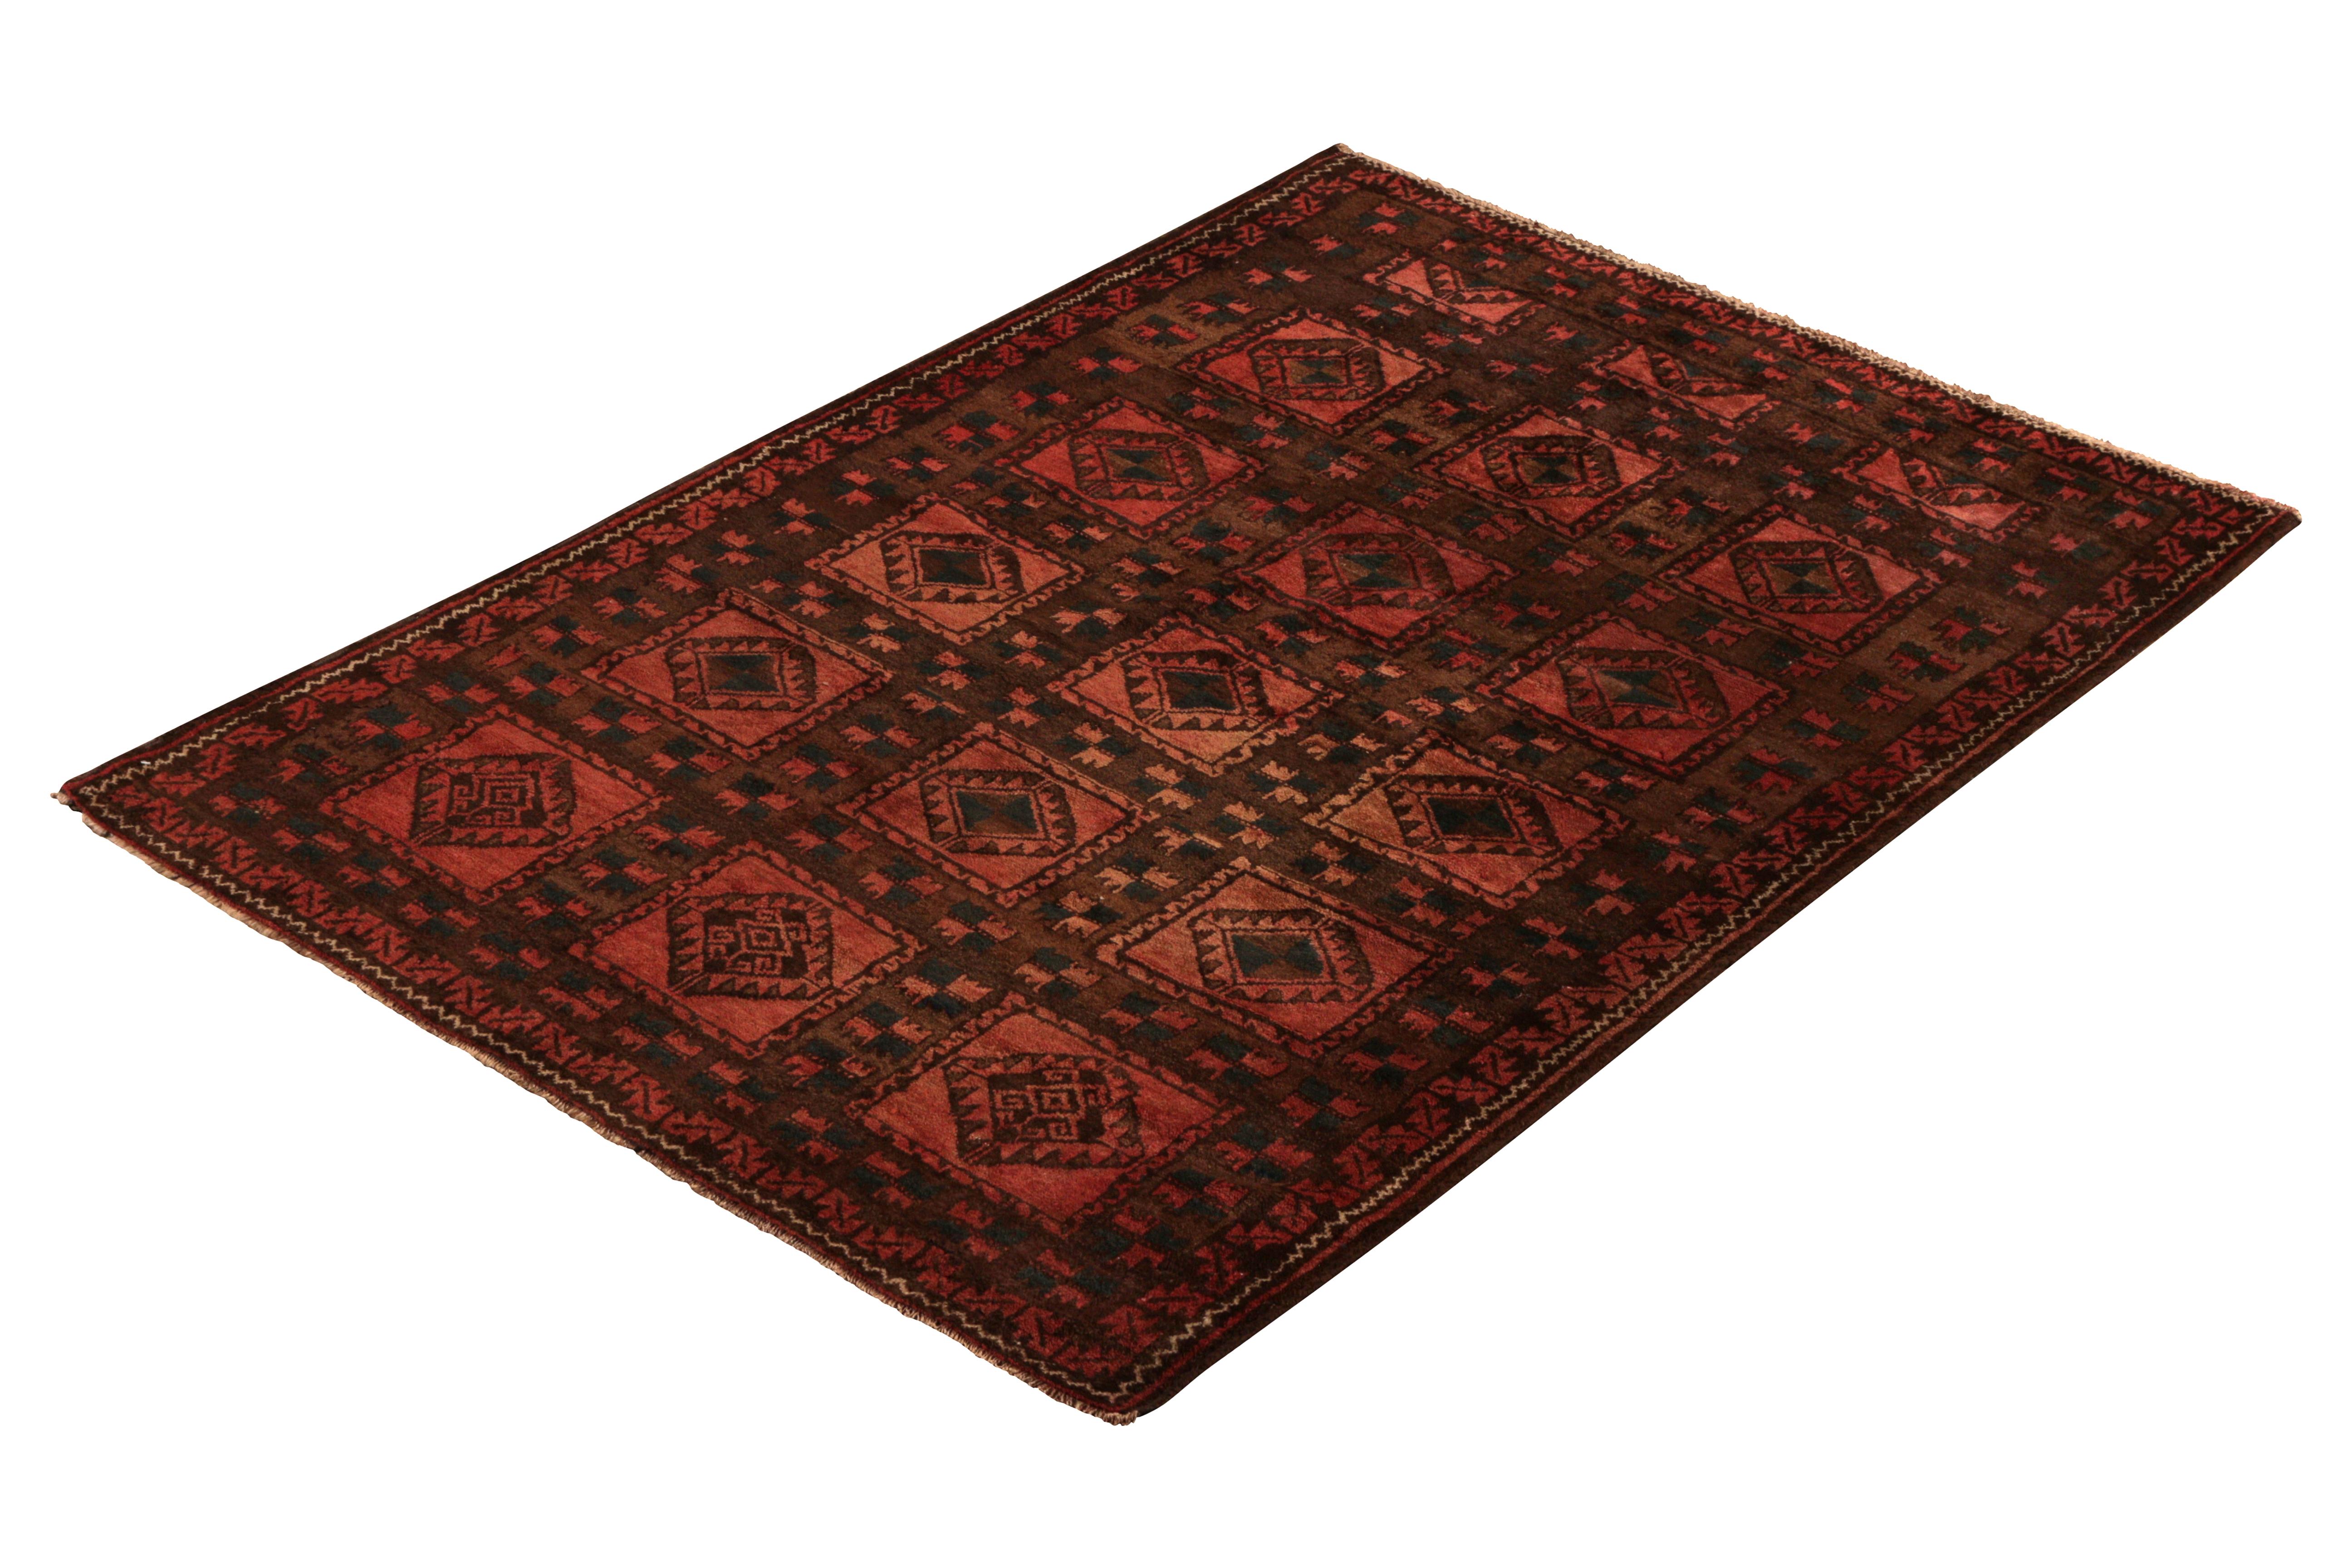 Hand knotted in wool originating circa 1910-1920, this antique rug connotes an tribal Baluch rug design with a unique emphasis on an atypical pink-red colorway. The subtle variations in this colorway dye lend the more traditional all-over medallion